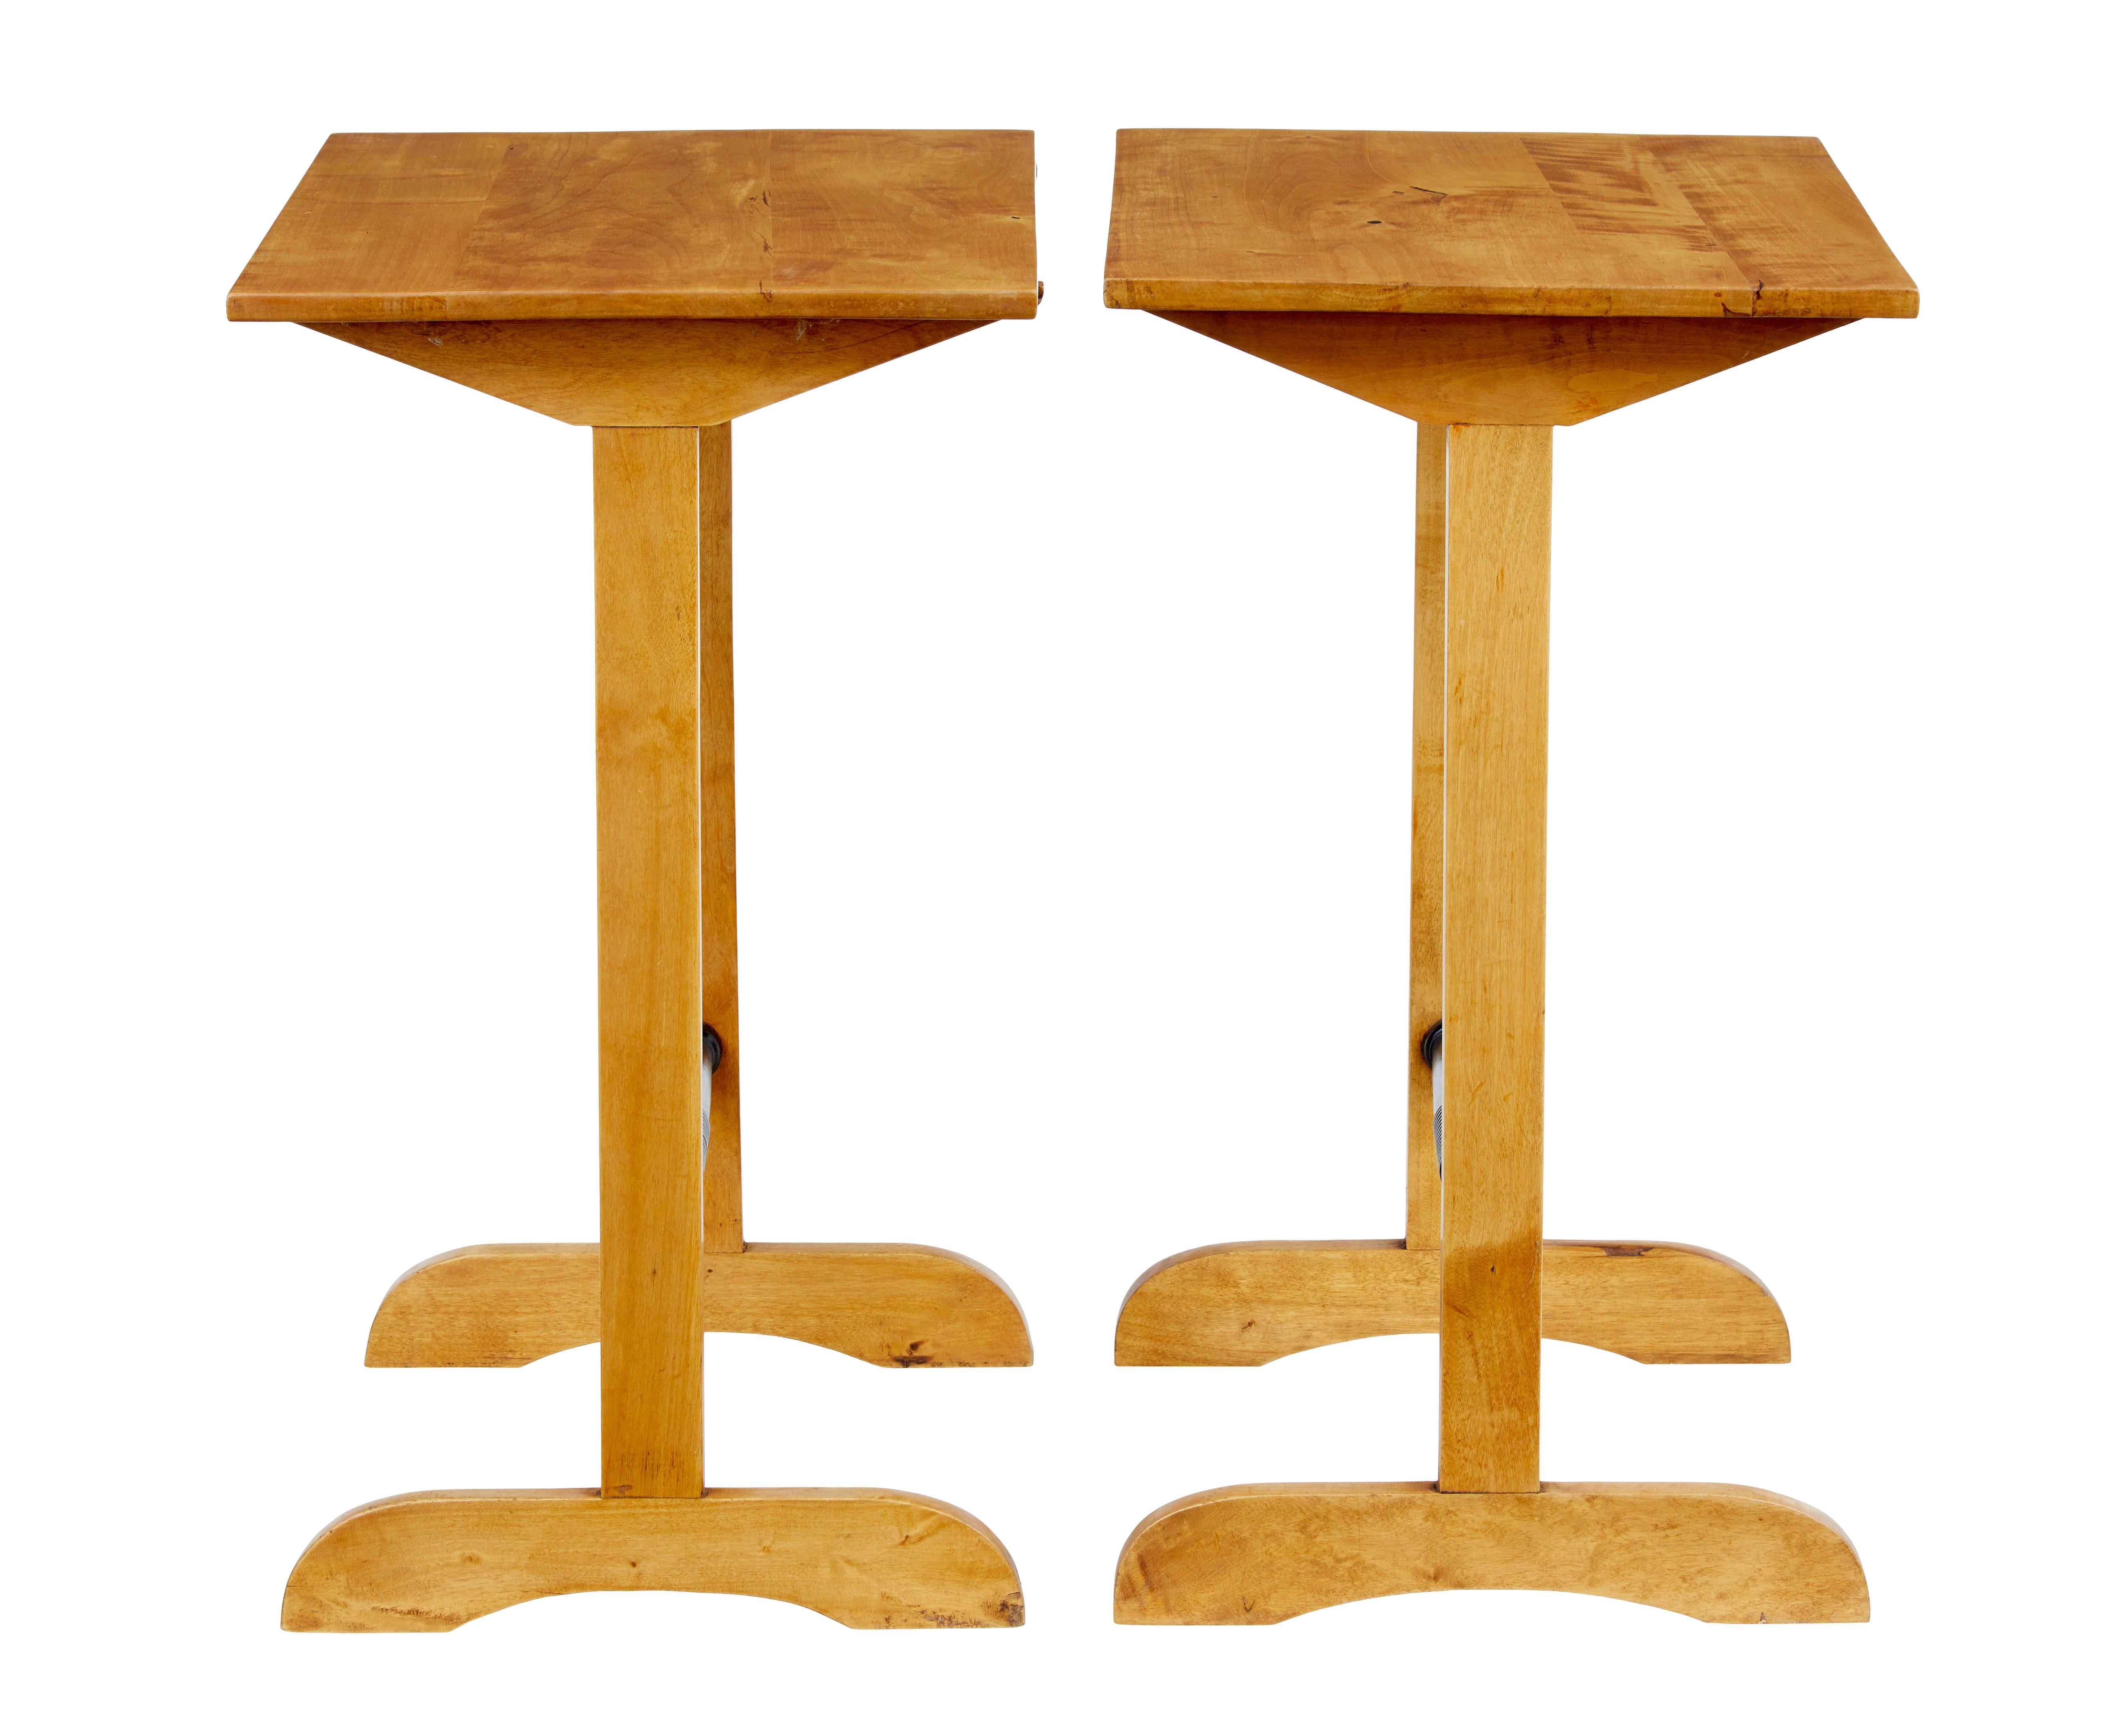 Pair of early 20th century Swedish birch side tables, circa 1920.

Unusual pair of birch tables that have potential multiple uses, but we think they would work well as a pair of lamp tables. Recently restored and back to their rich birch colour.